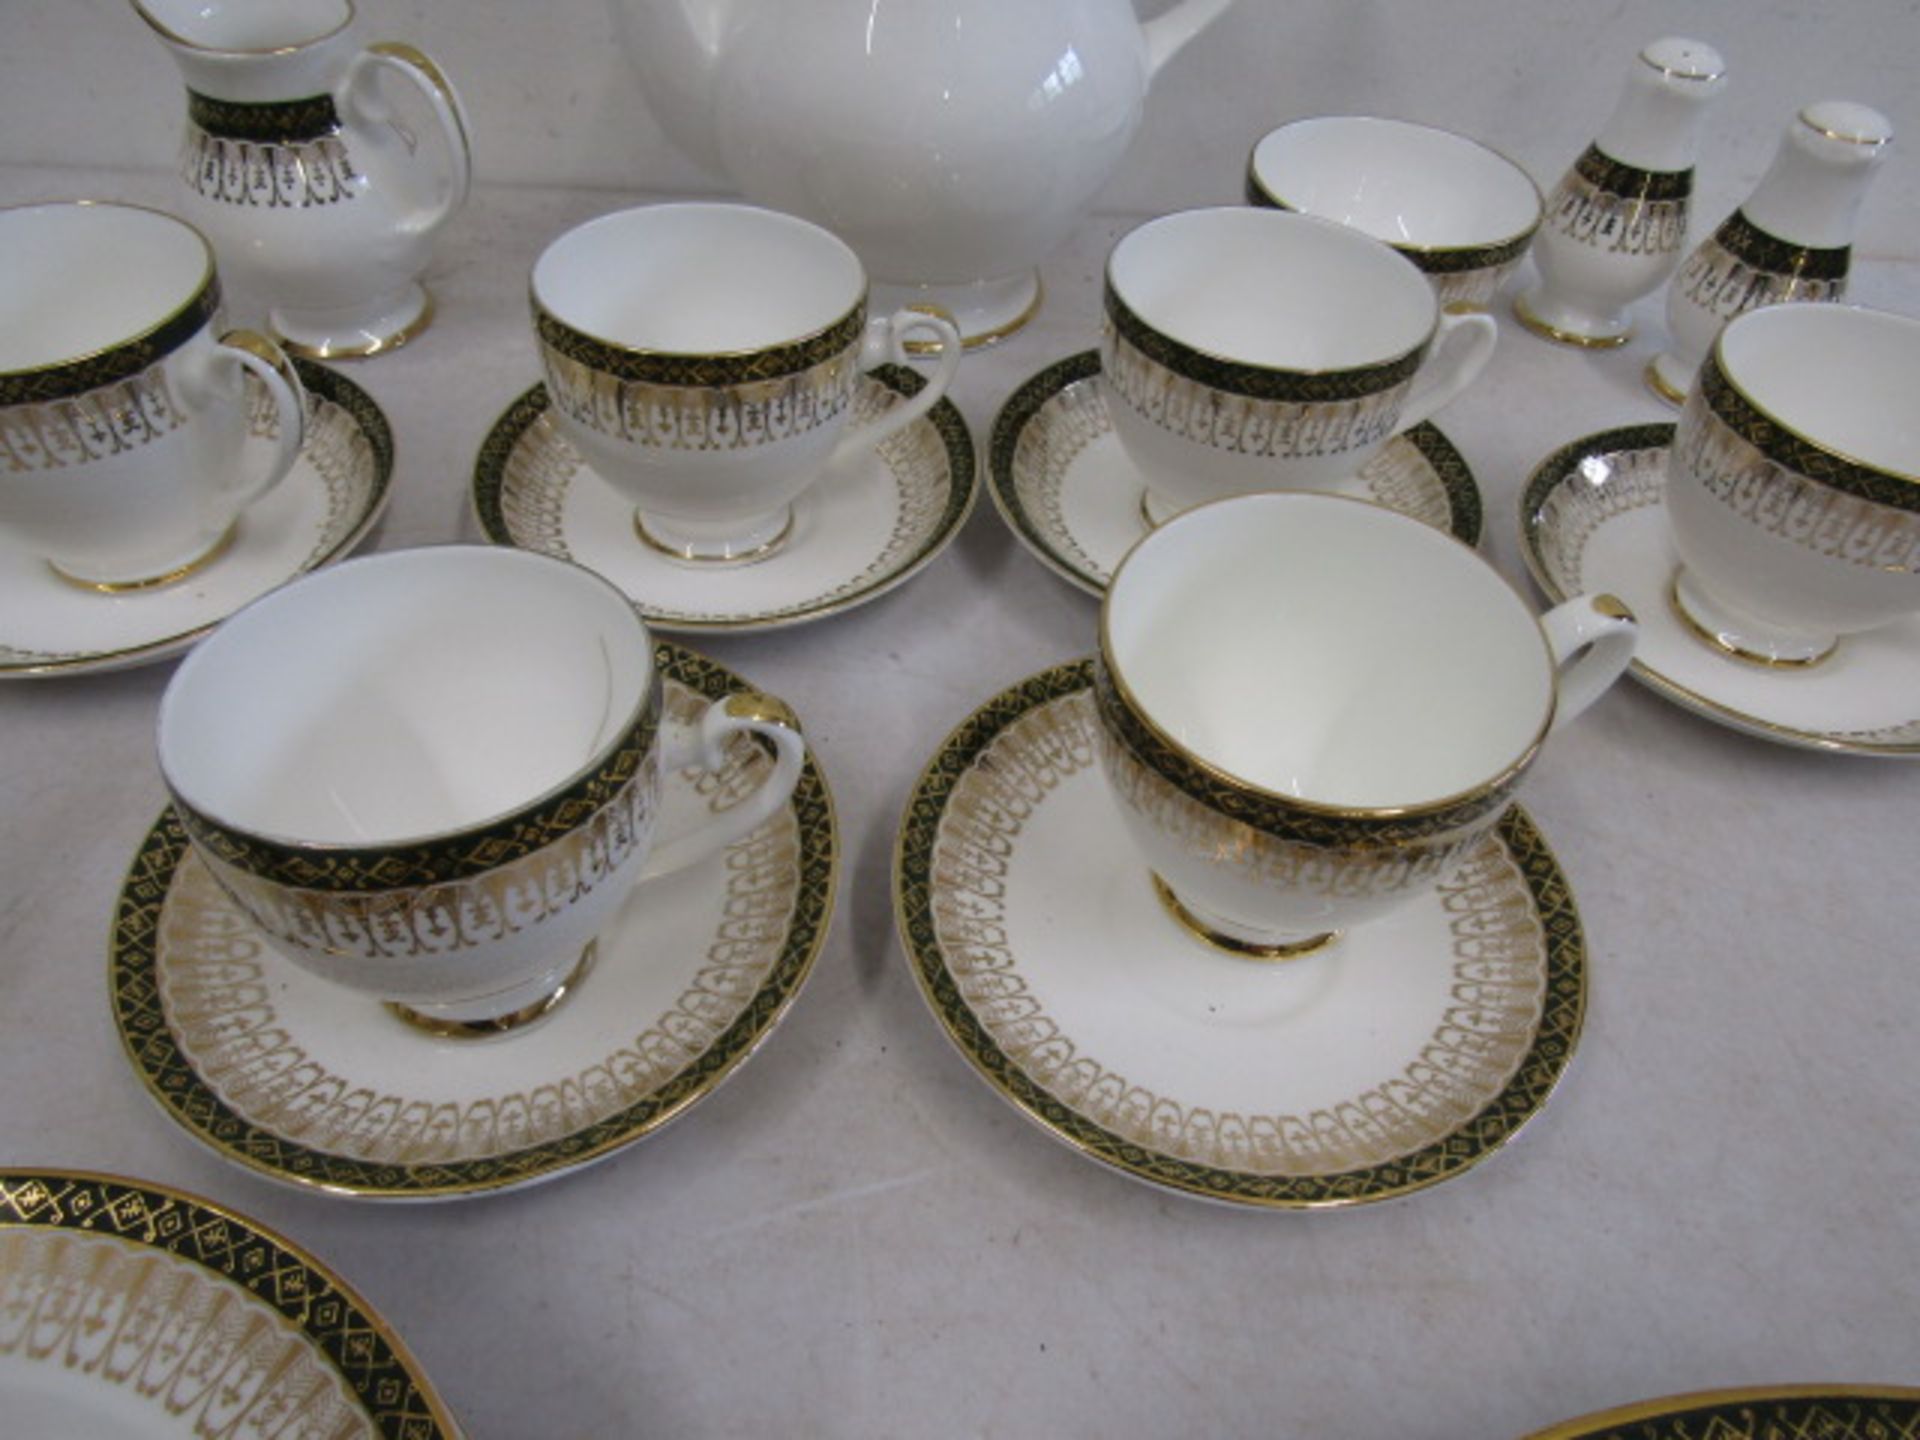 Royal Doulton 'Majestic' dinner service for 6 - Image 5 of 7